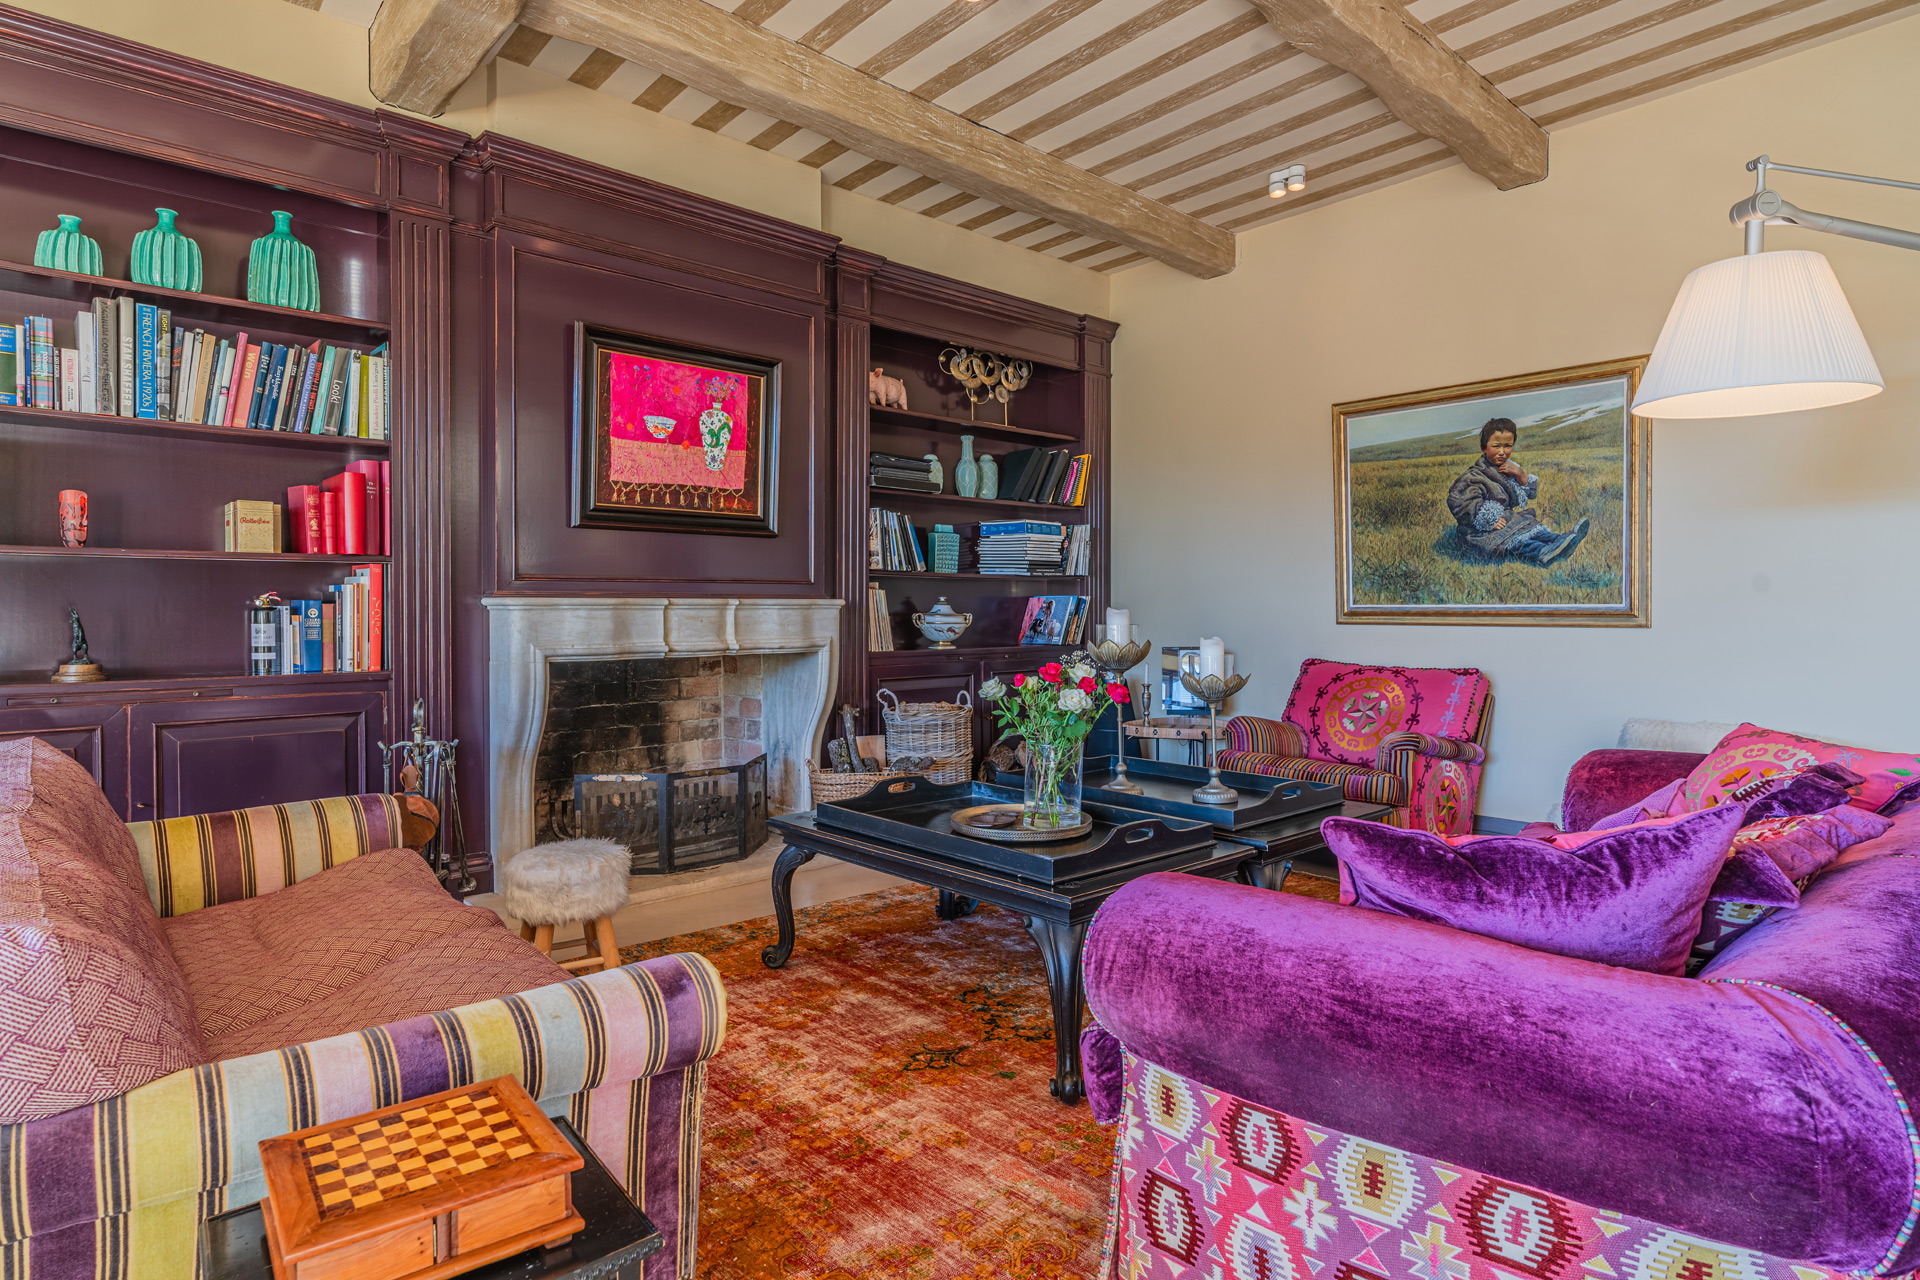 Living room with purple velvet sofas, a stripey brown armchair and purple bookshelves.